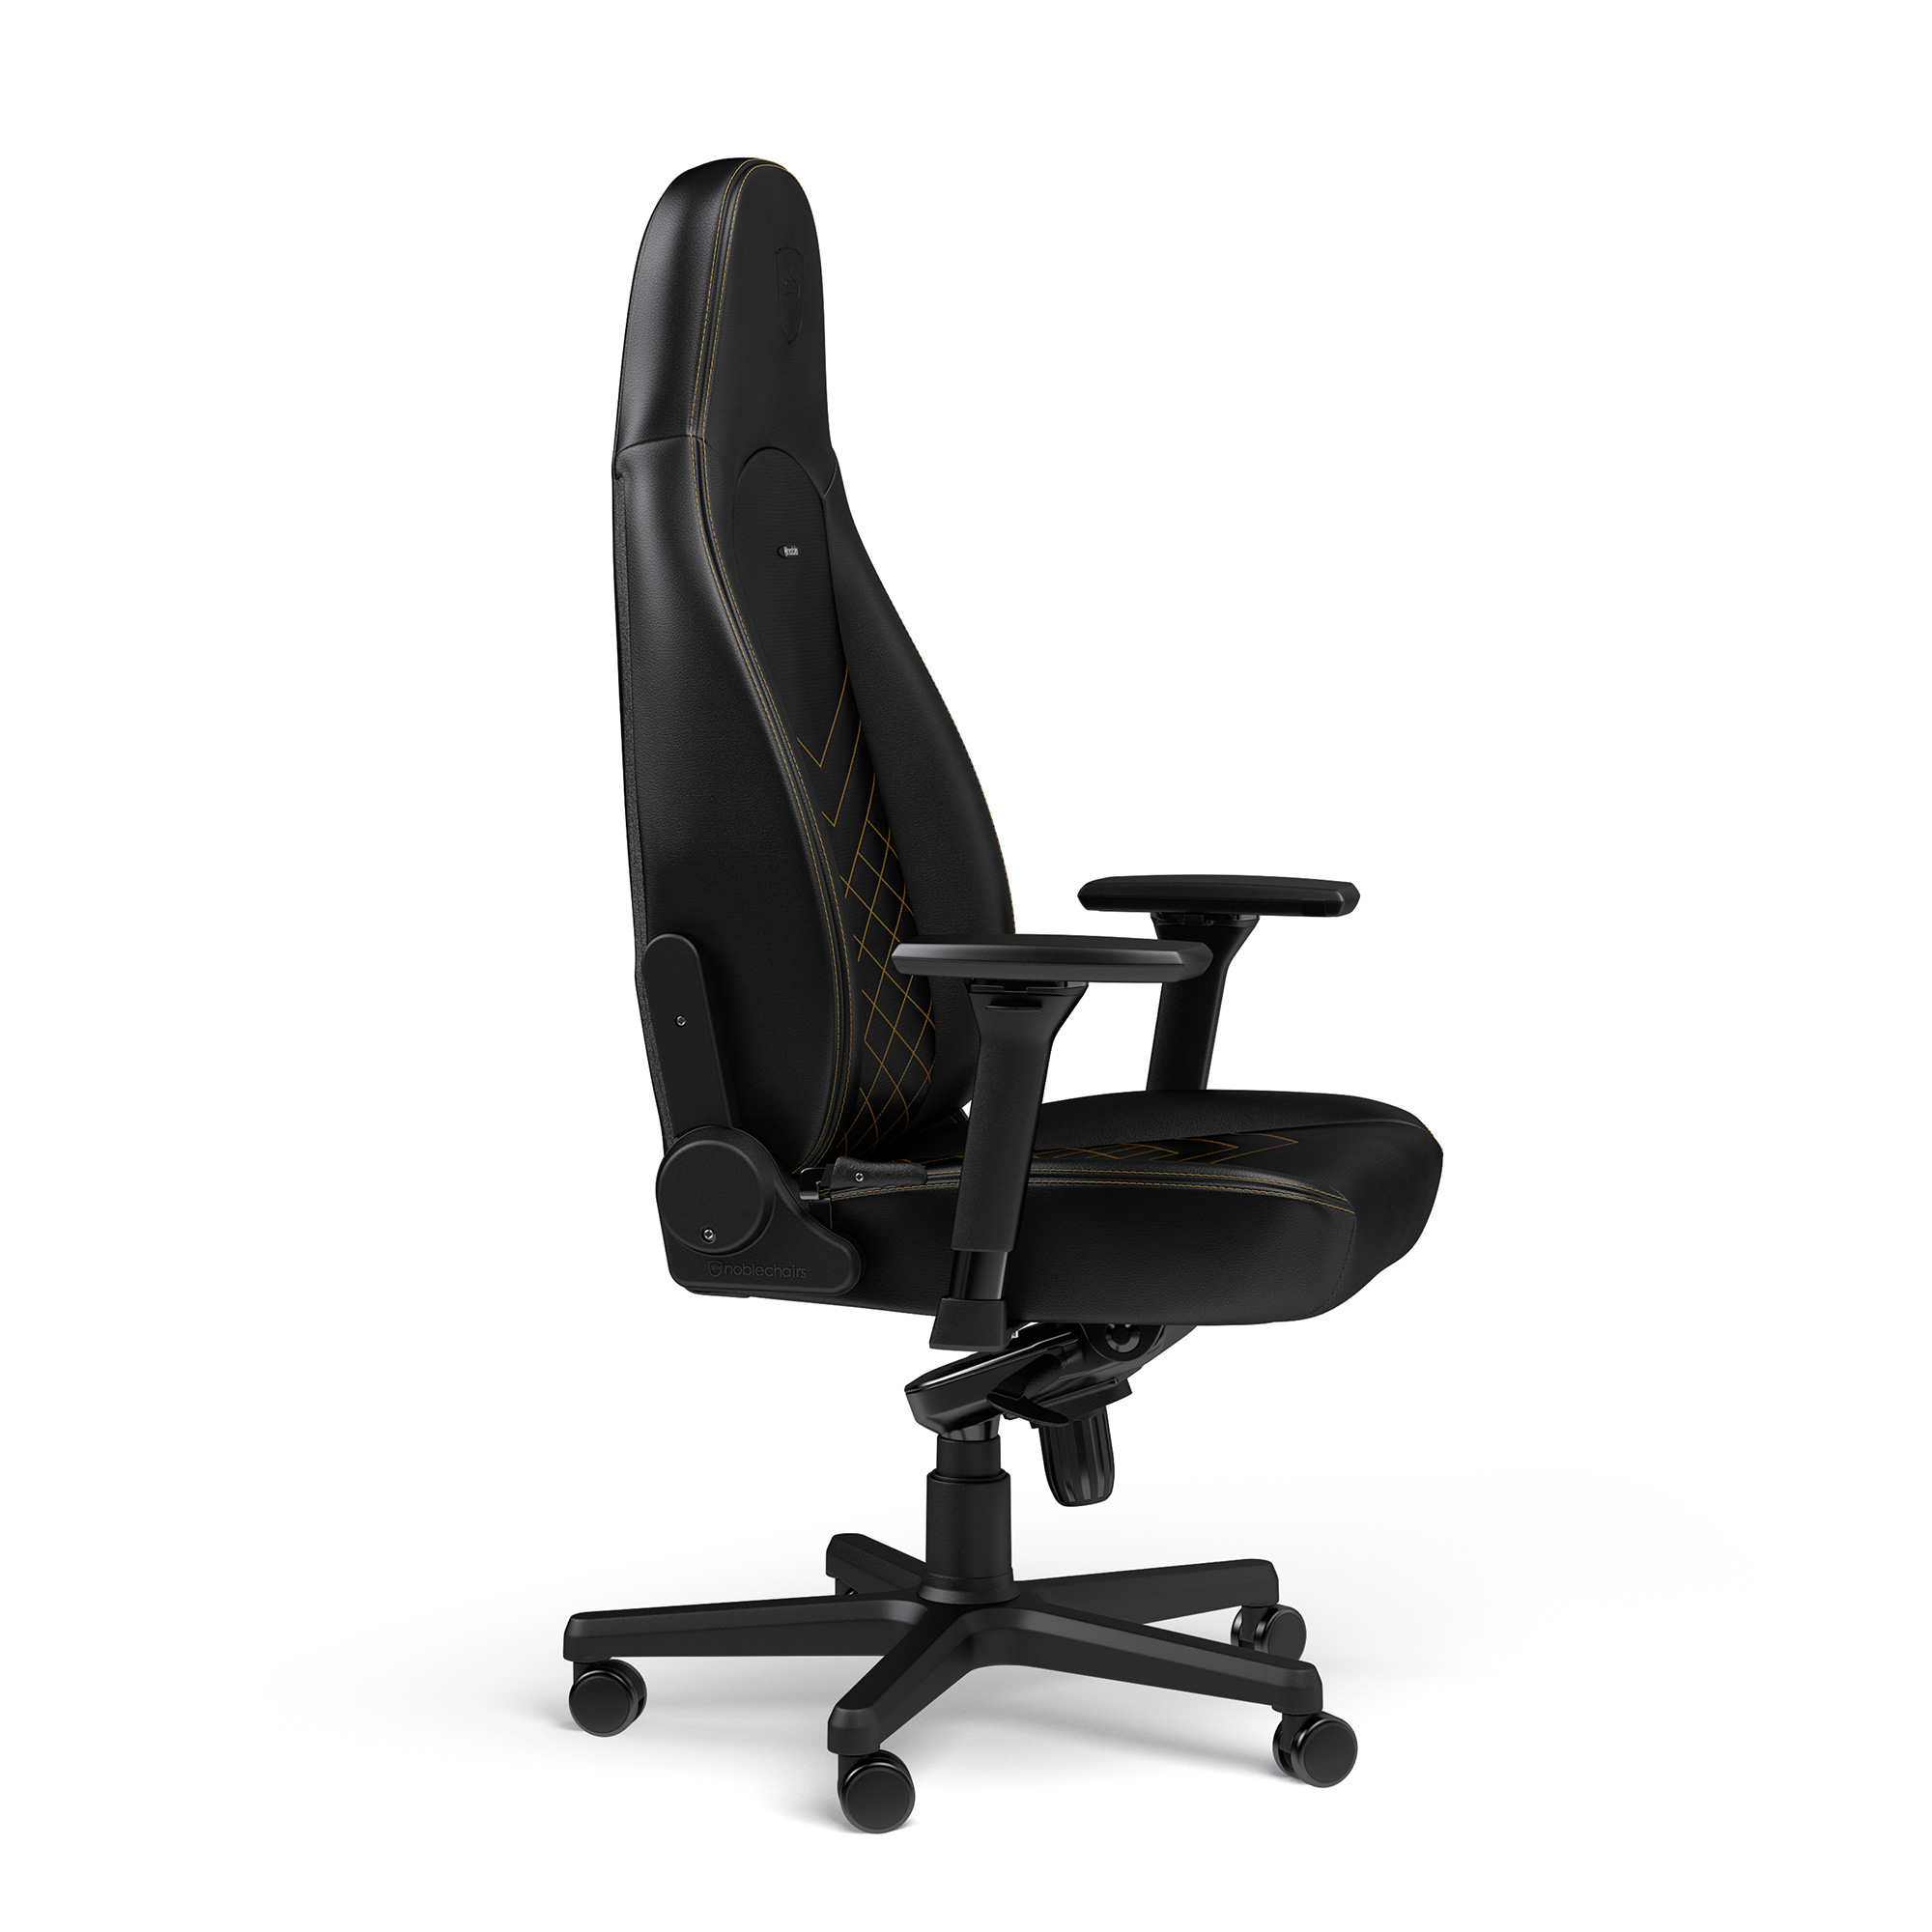 noblechairs - noblechairs ICON Gaming Chair - Black/Gold